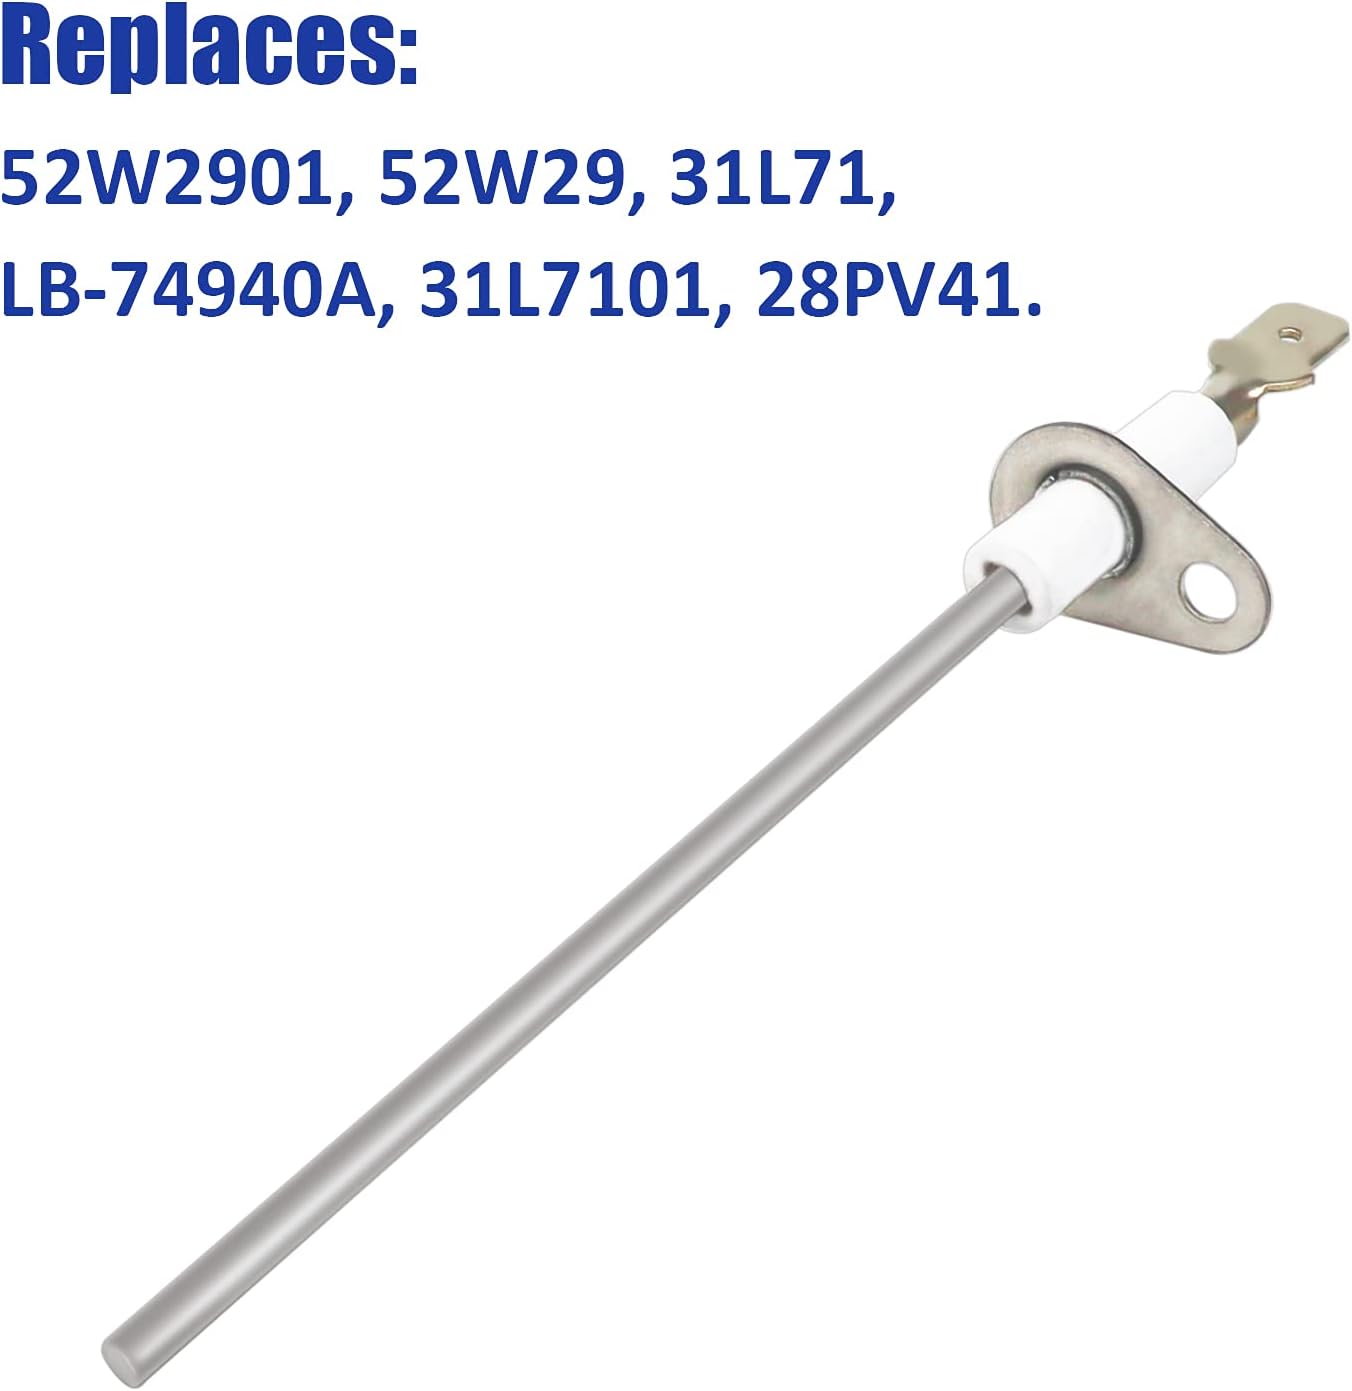 yl super products Furnace Flame Sensor for 52W29 Compatible with Len-nox, Arm-strong, Du-cane Furnaces-Replaces 52W2901 LB-74940A 31L71 Fits for